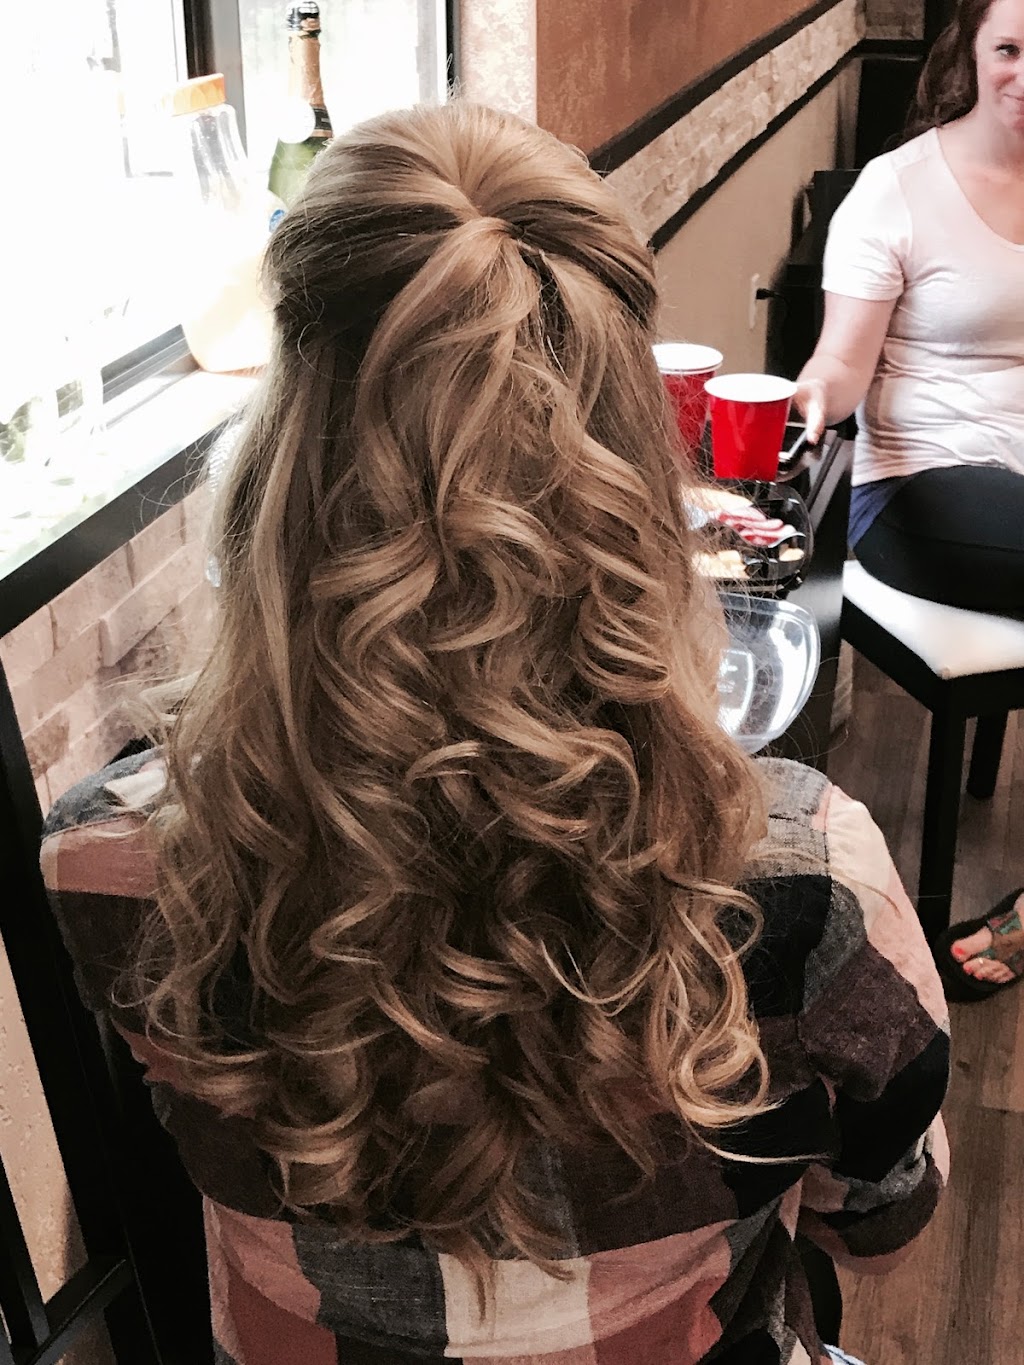 Hair By Kaylee Turbeville | Old Kyle Rd, Wimberley, TX 78676, USA | Phone: (512) 214-4748